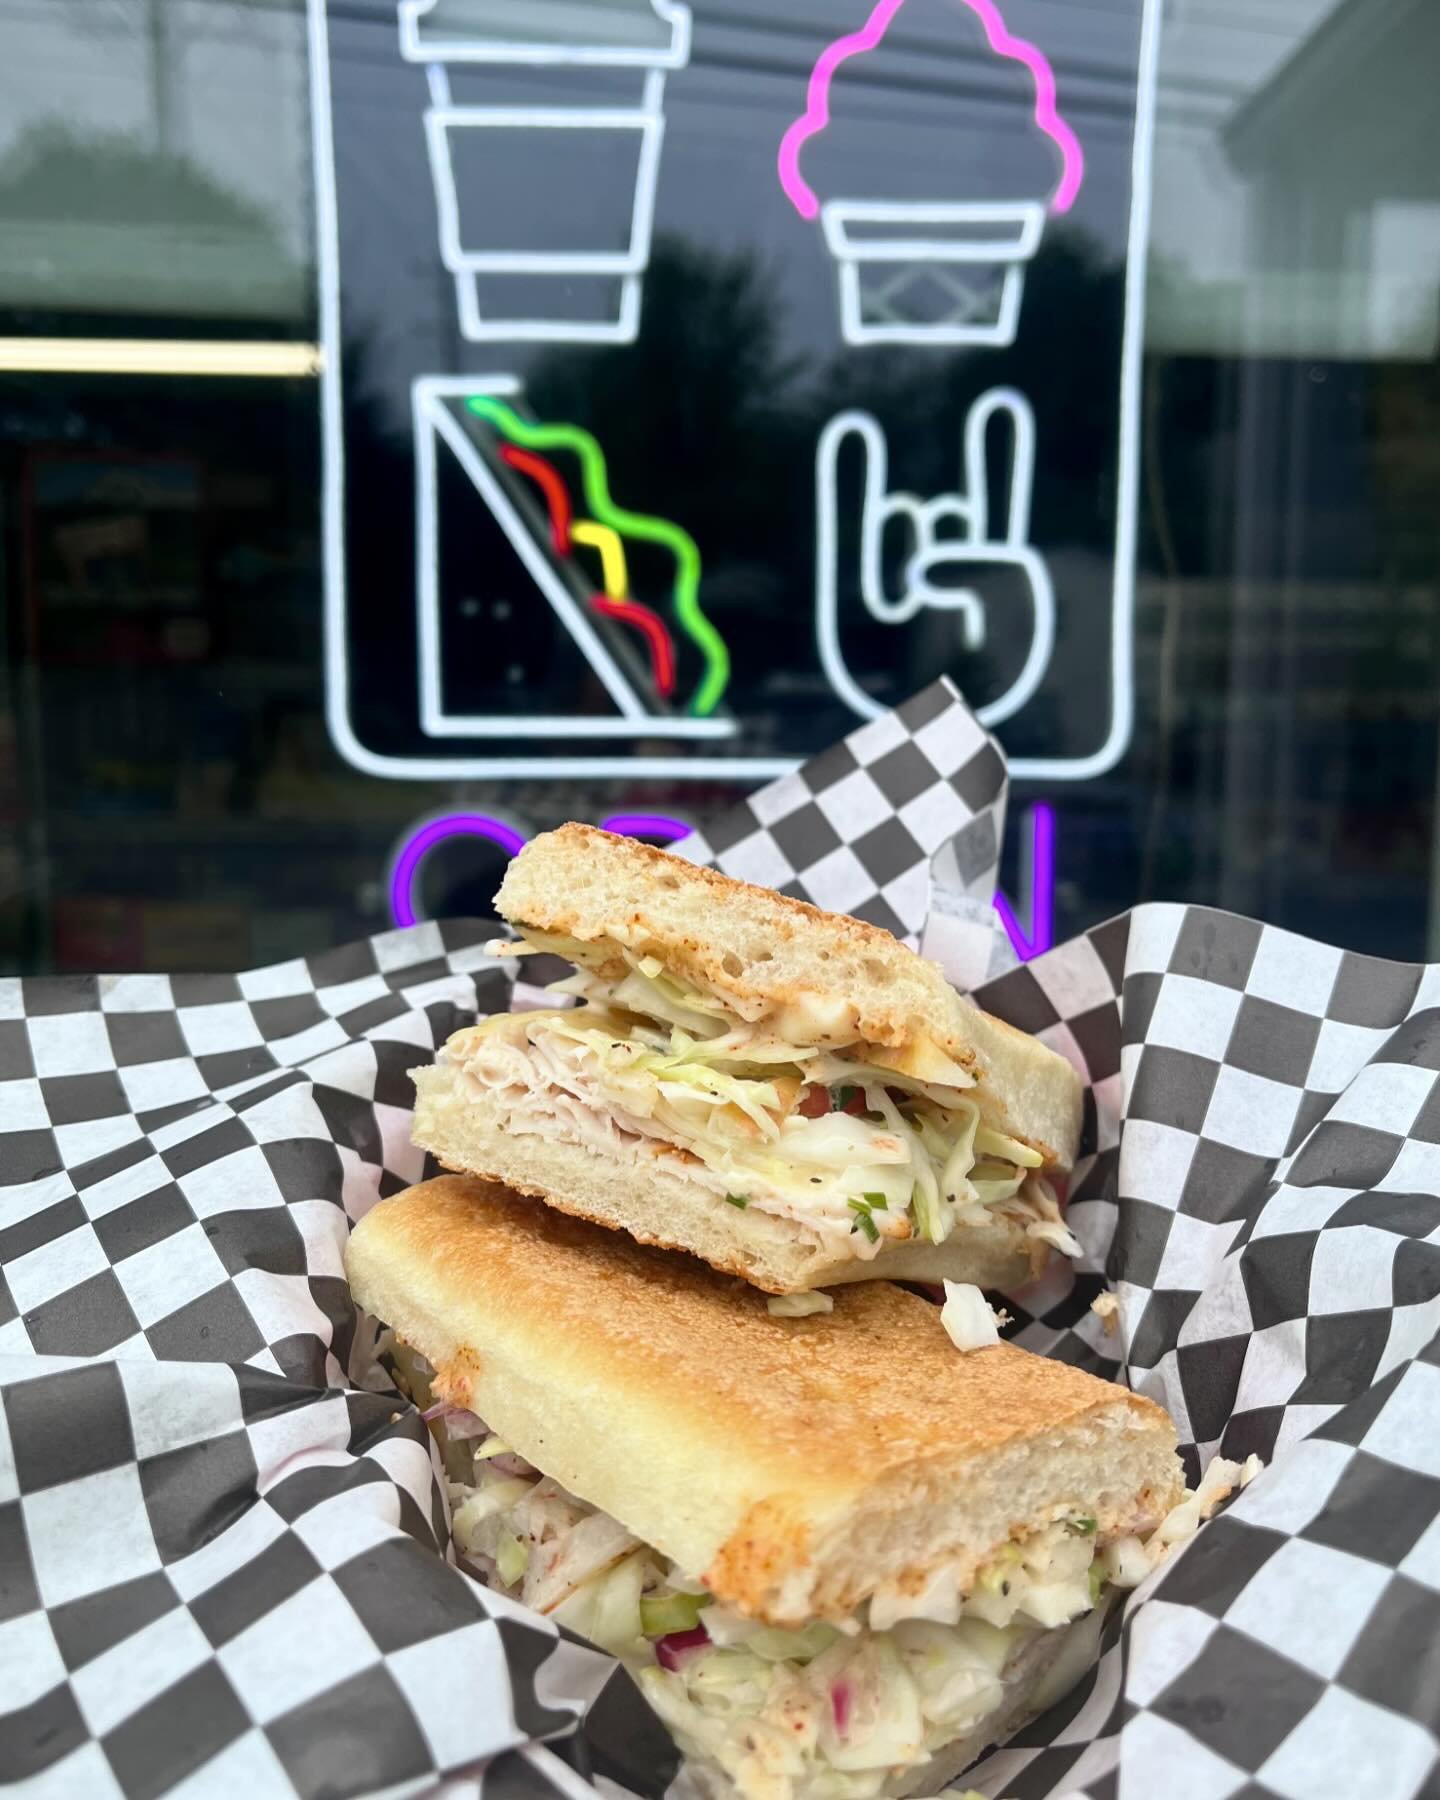 Today&rsquo;s sandwich special is the Georgia Reuben! Turkey + Swiss plus housemade slaw and Thousand Island dressing pressed and all melty and delicious. 🥪 Available today - and you can order it online! Just choose the &ldquo;Sandwich Special&rdquo